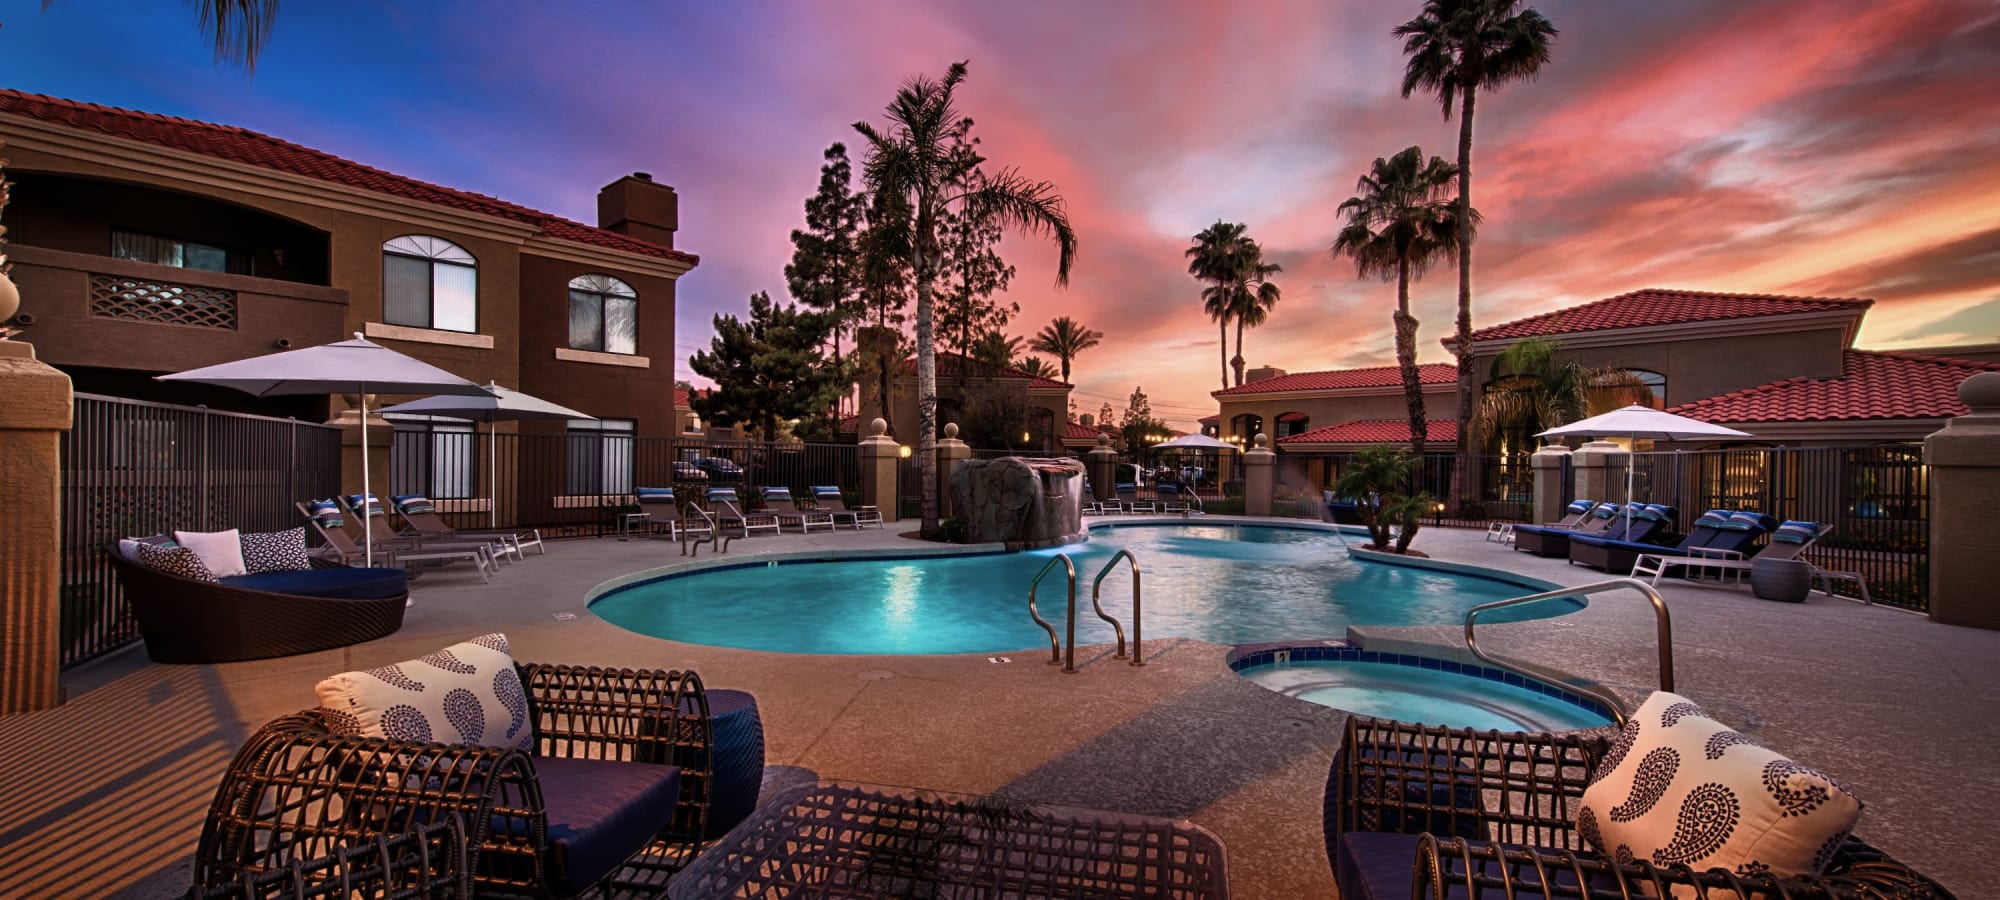 Pool and deck chairs at sunset at The Ventura in Chandler, Arizona